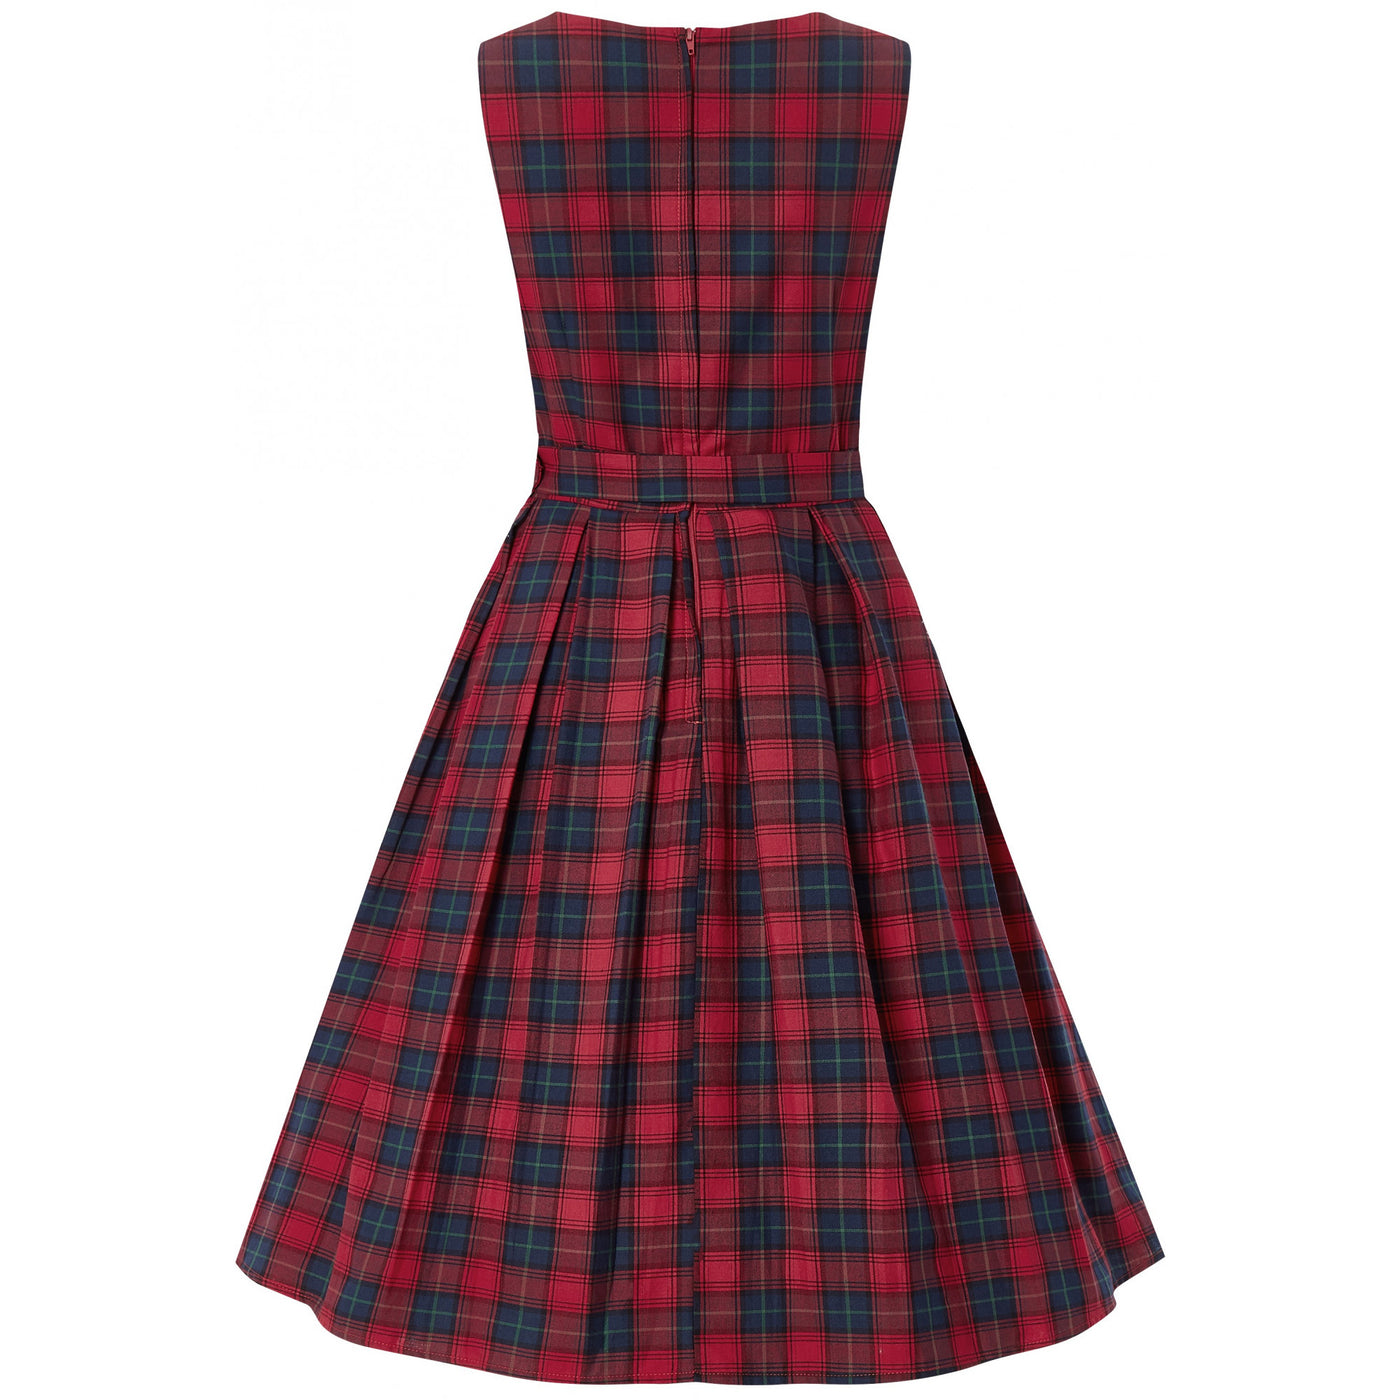 sleeveless Annie dress in red, with blue checks and matching belt, back view